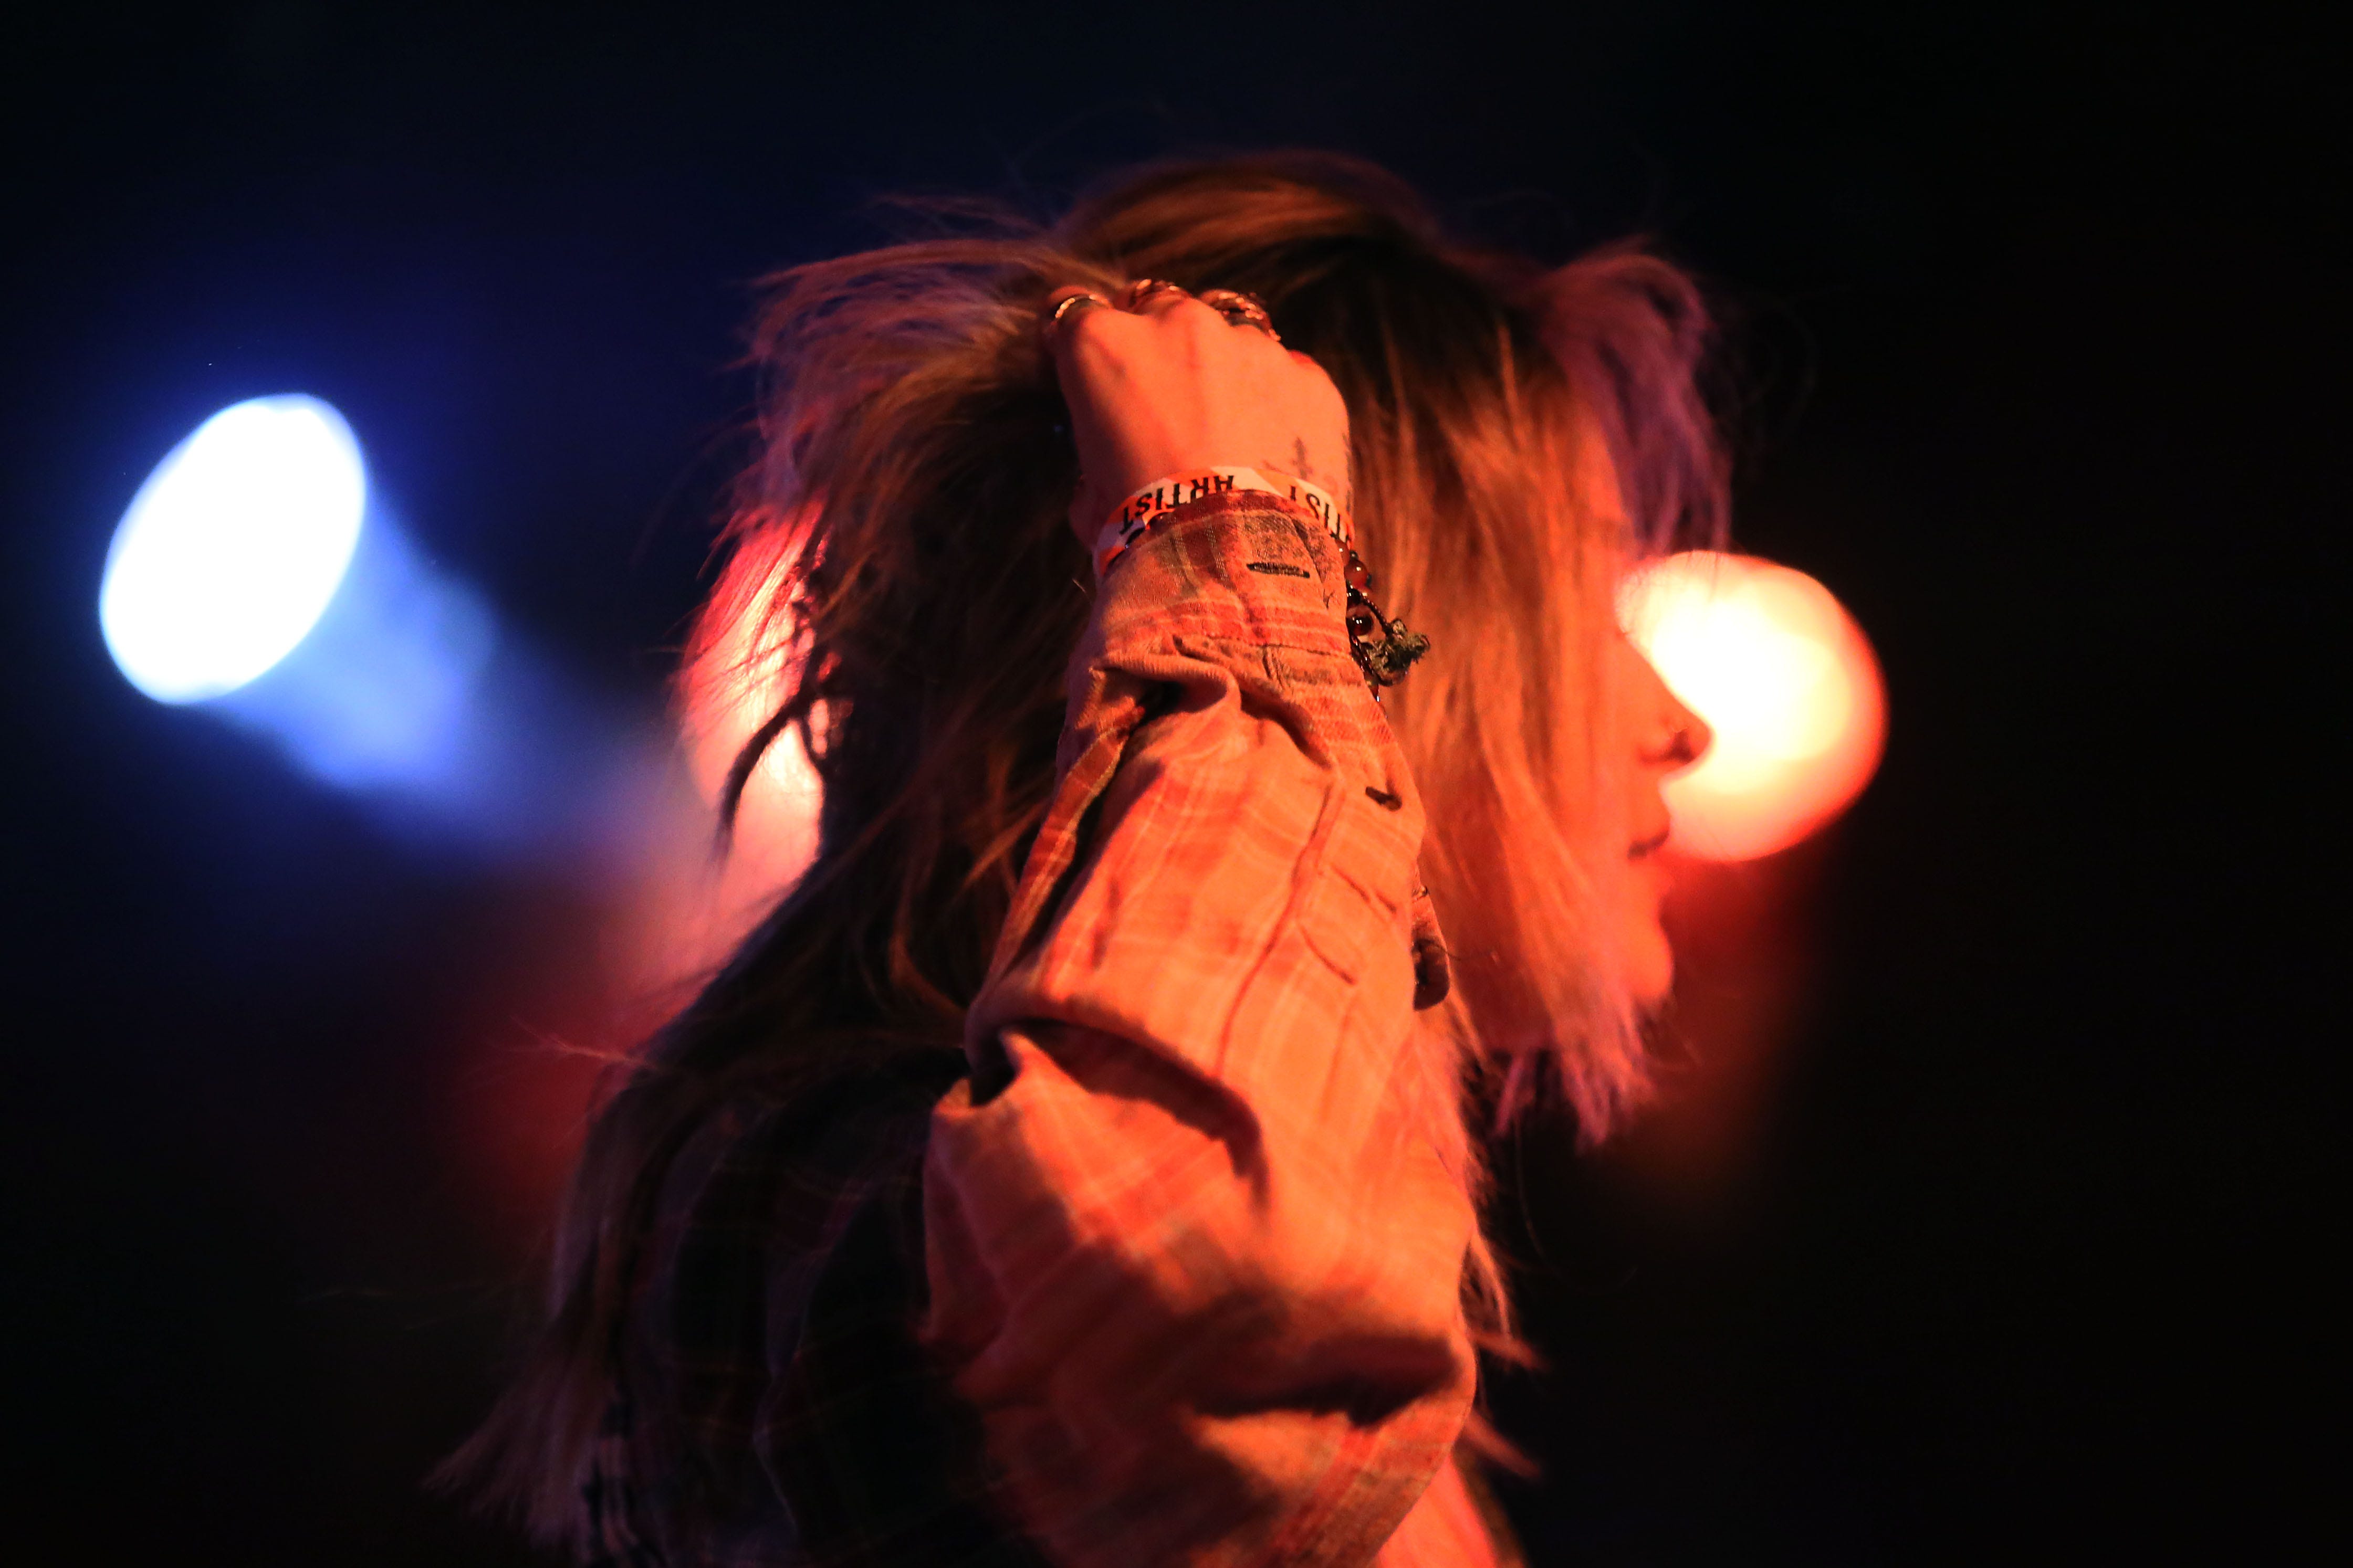 Paris Jackson performs at Scoot Inn during South by Southwest Wednesday, March 16, 2022, in Austin.